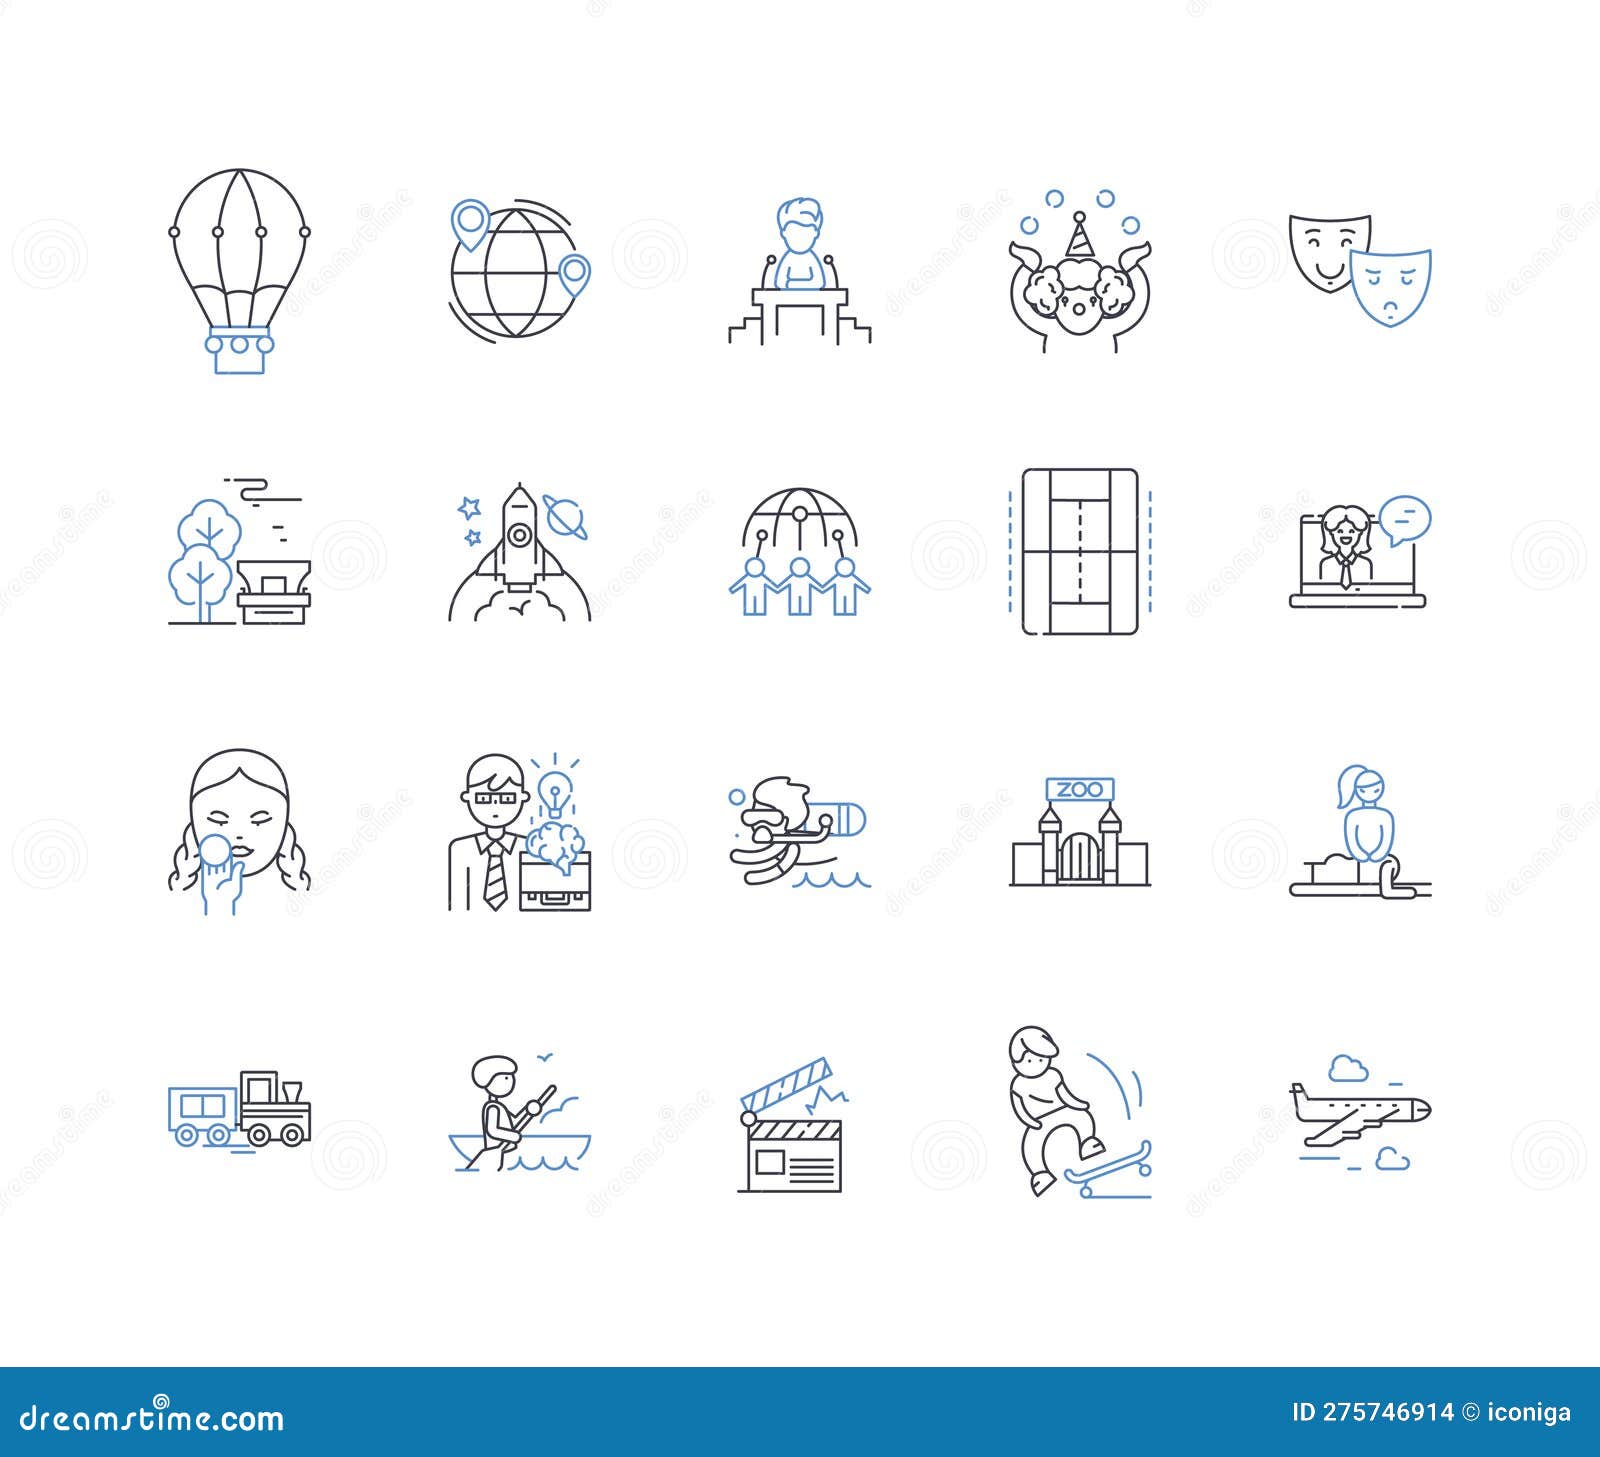 invigorating pursuits line icons collection. hiking, rock-climbing, running, surfing, skiing, skydiving, bungee-jumping